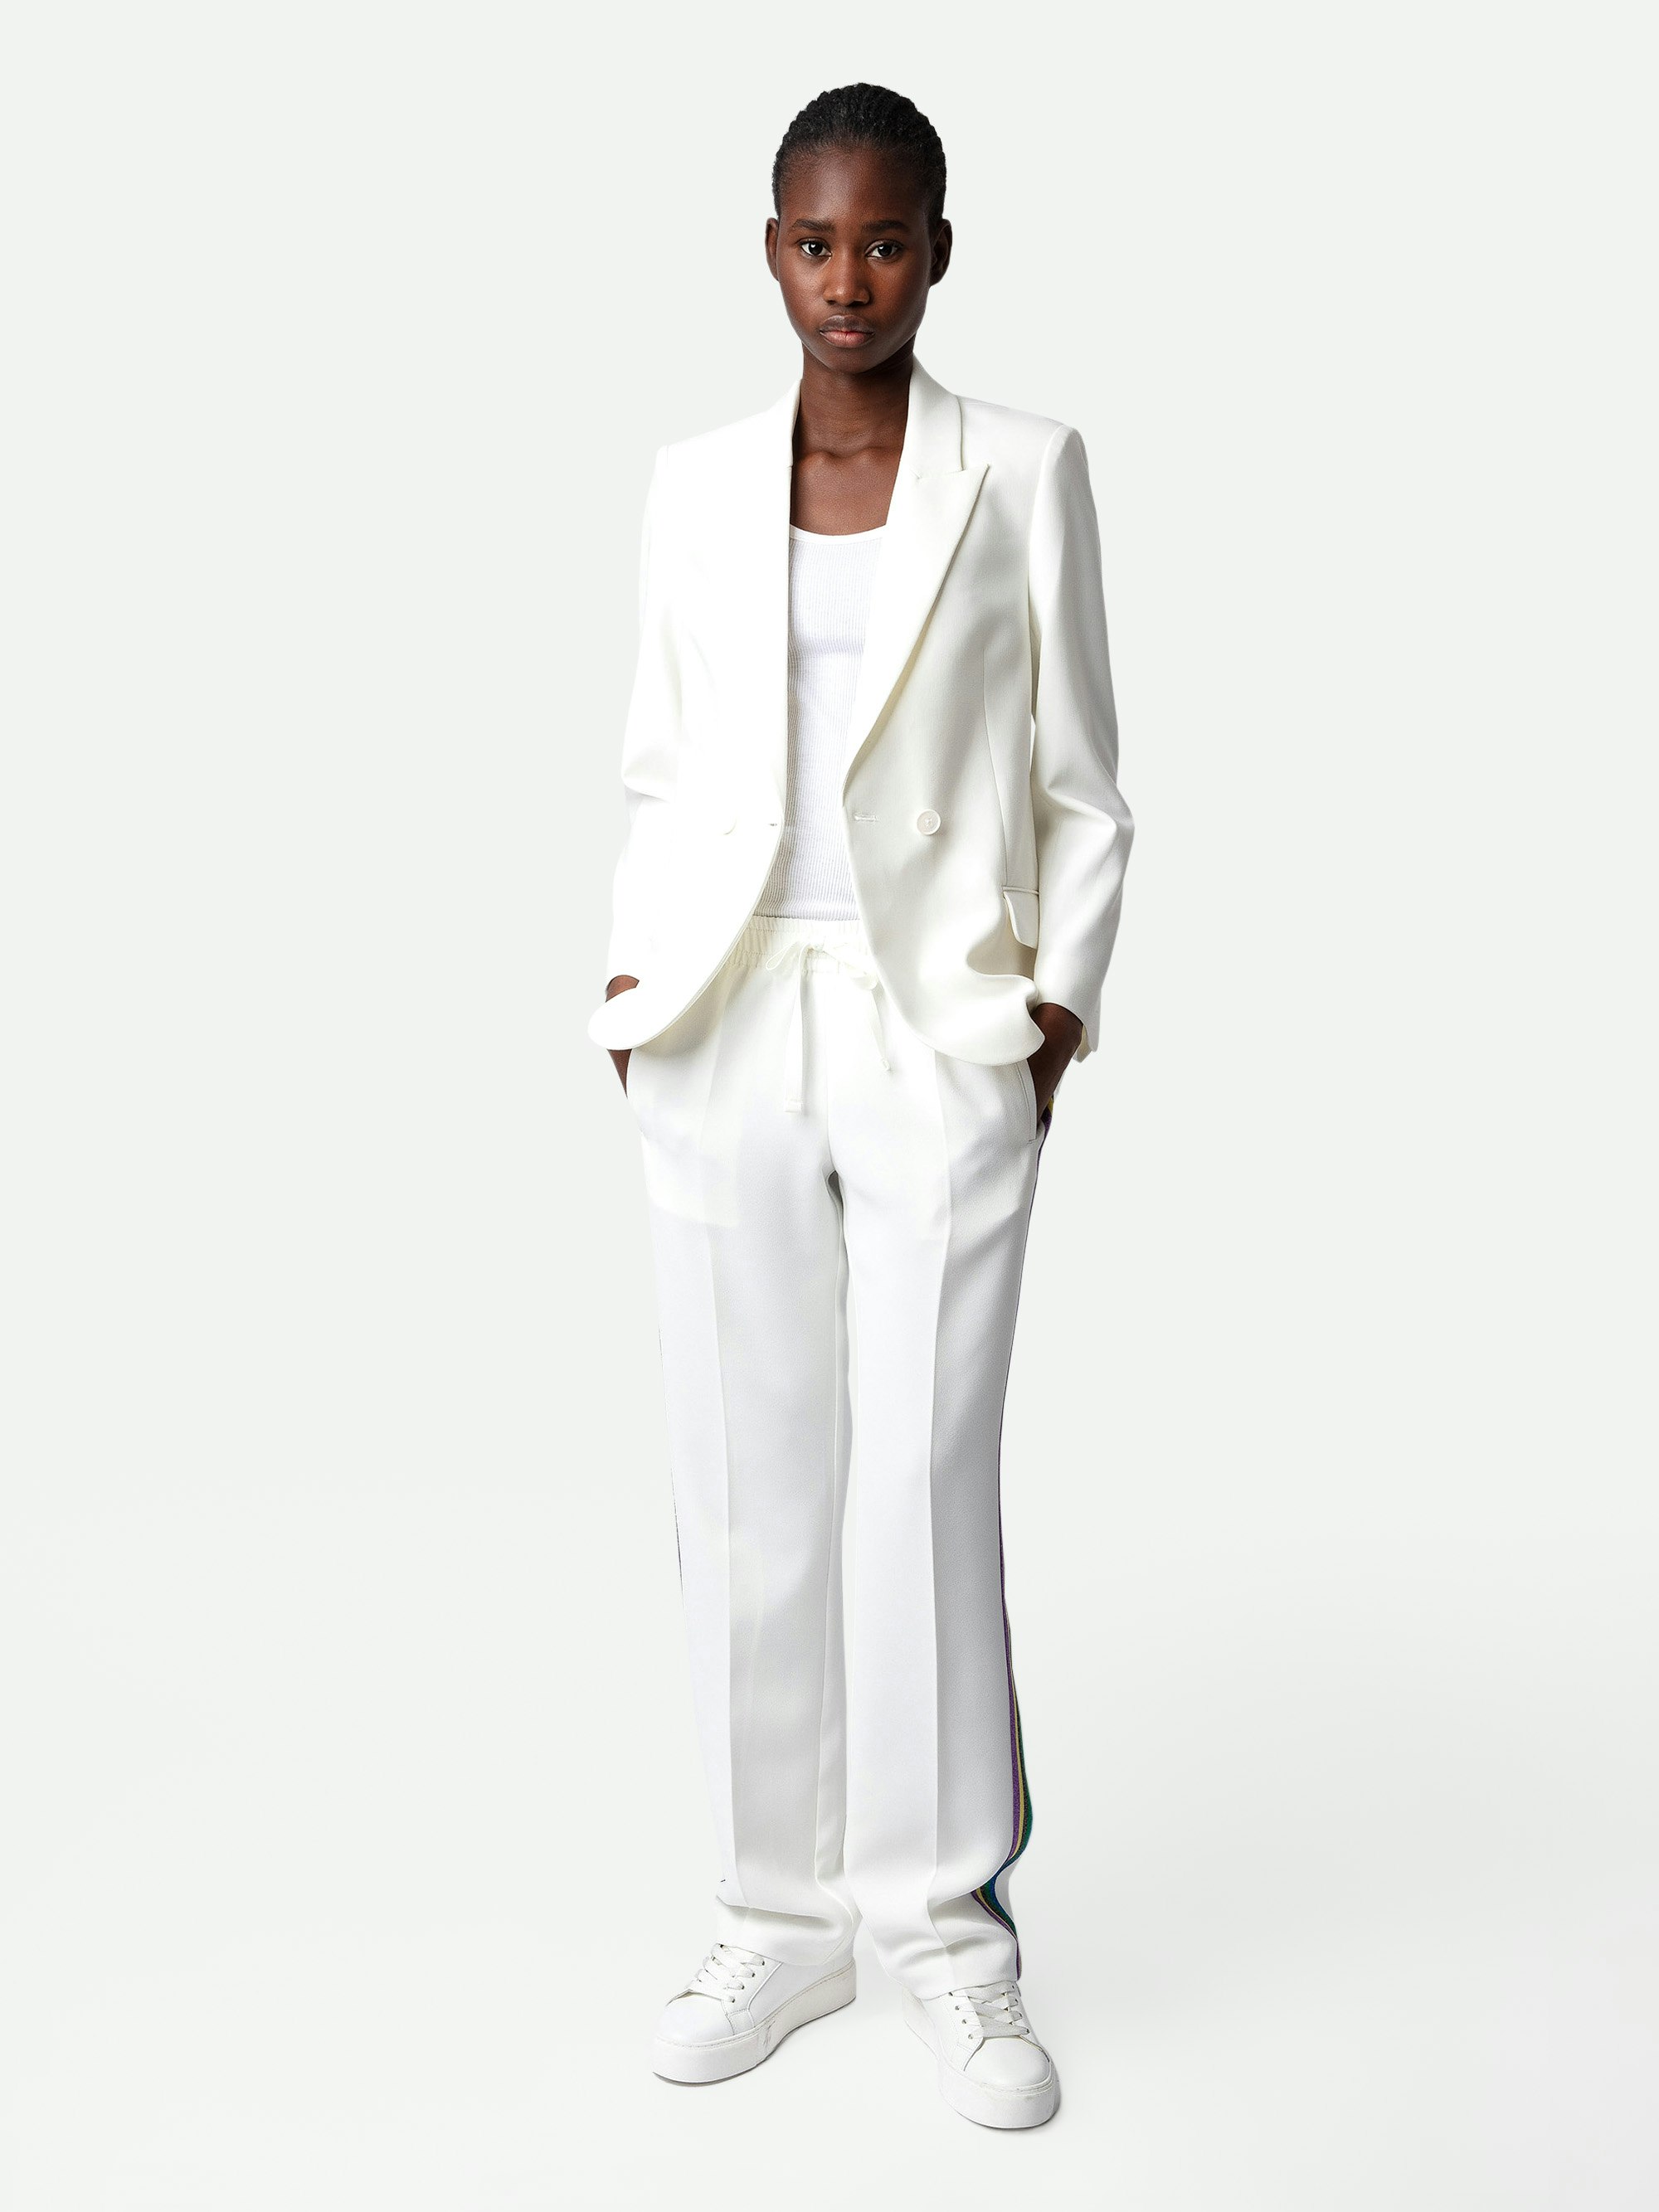 Pomy Trousers - White crêpe trousers with glittery side bands and drawstring ties.